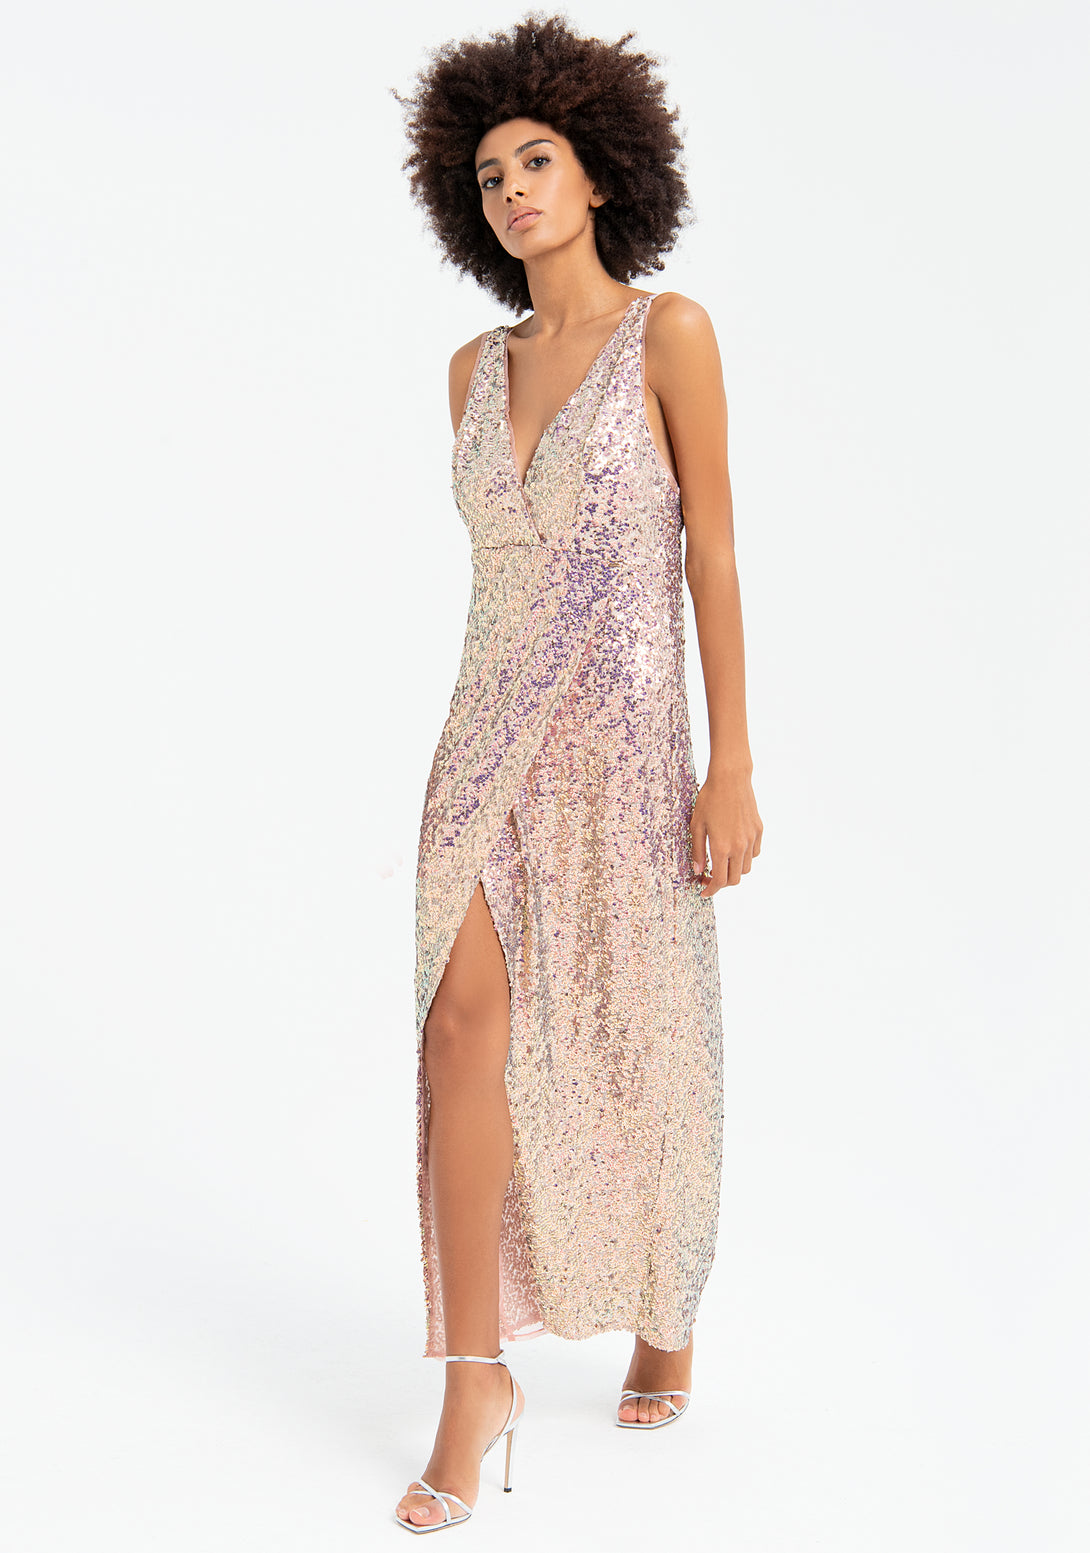 Dress with no sleeves, long, made with shiny sequins